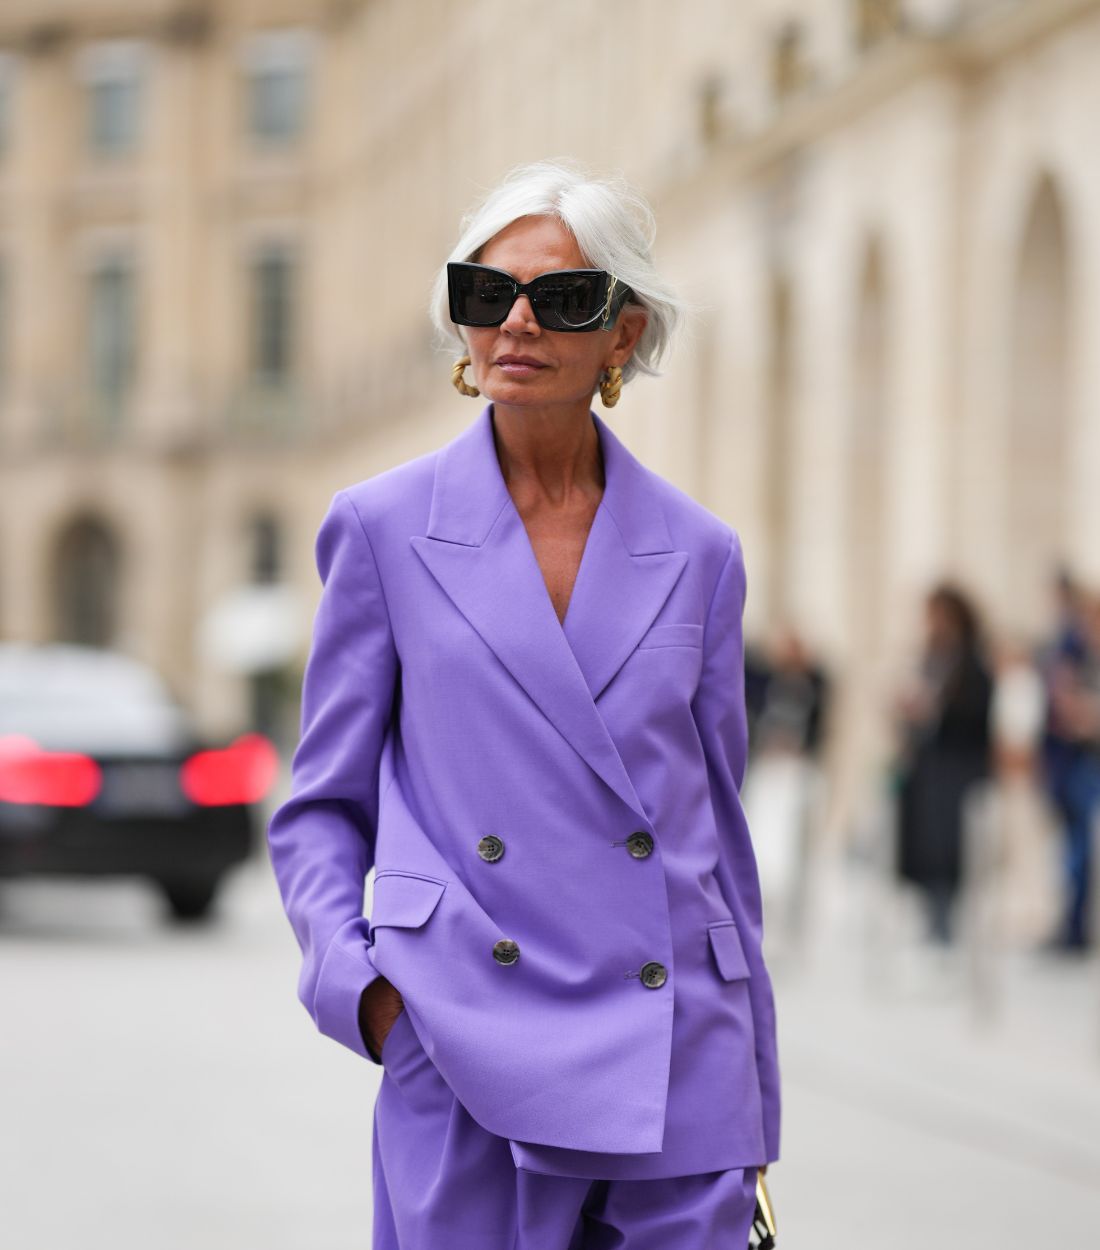 Grey haired woman in purple suit street style 